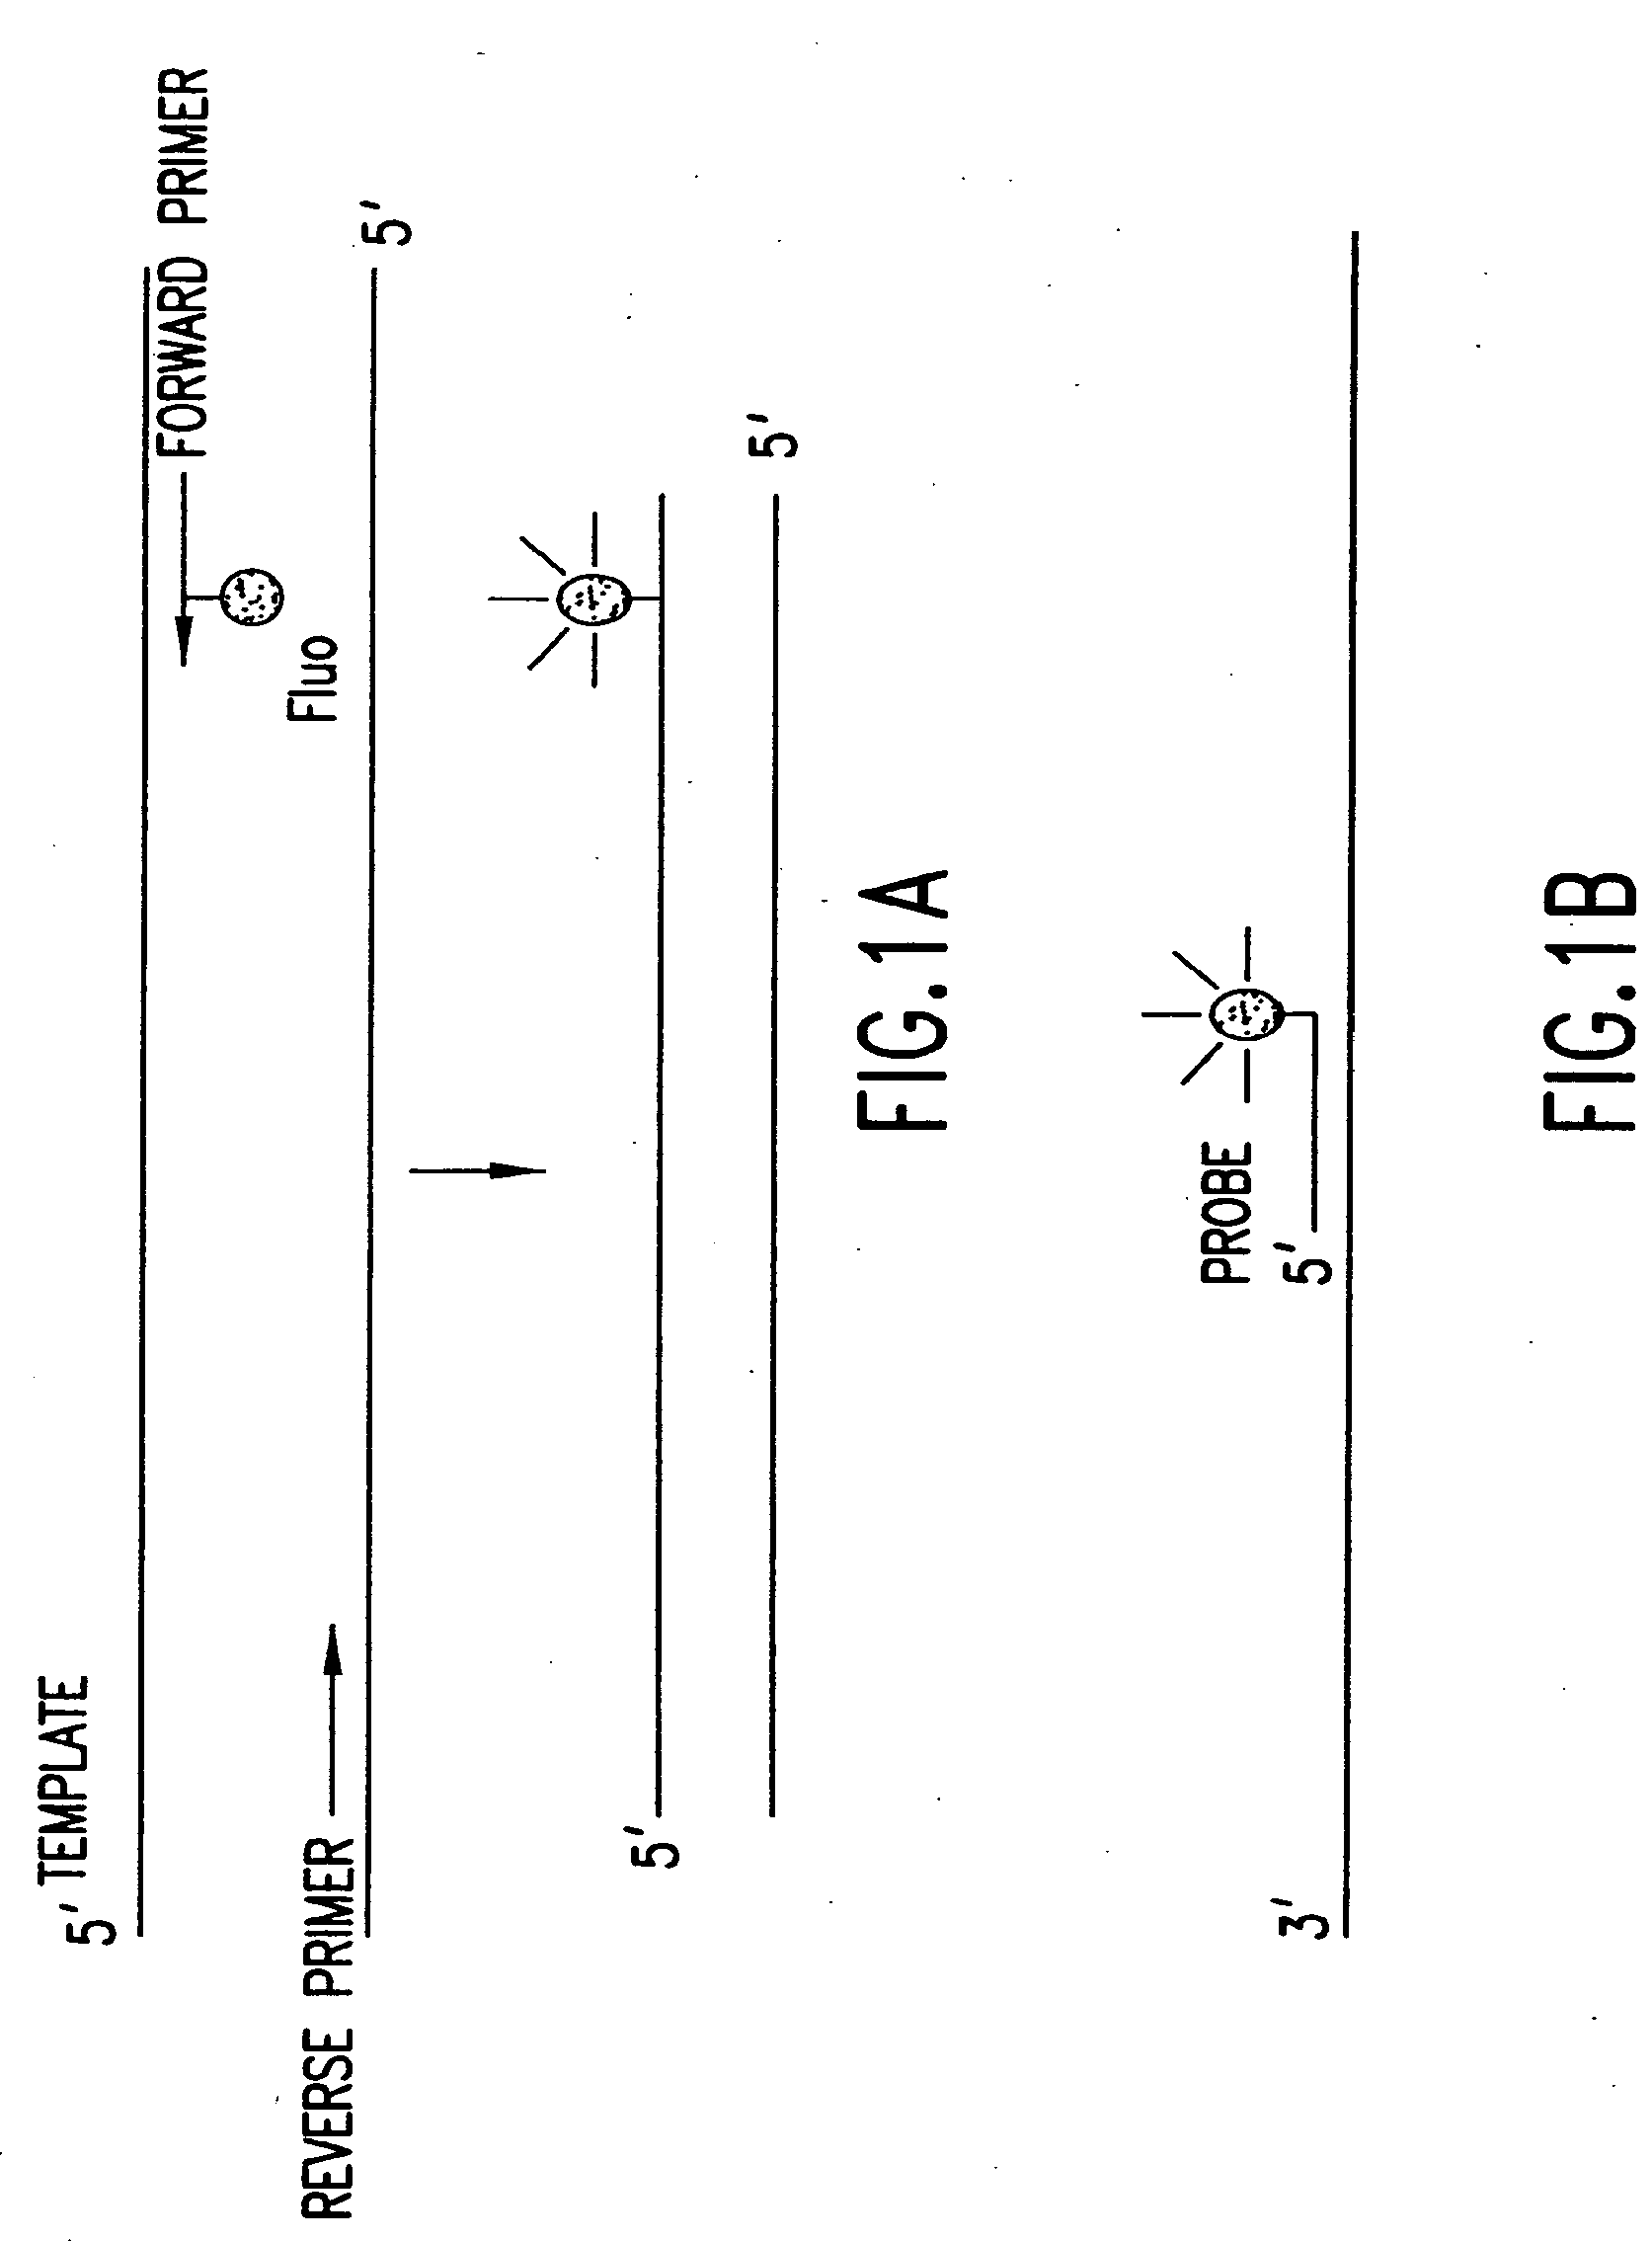 Primers and methods for the detection and discrimination of nucleic acids